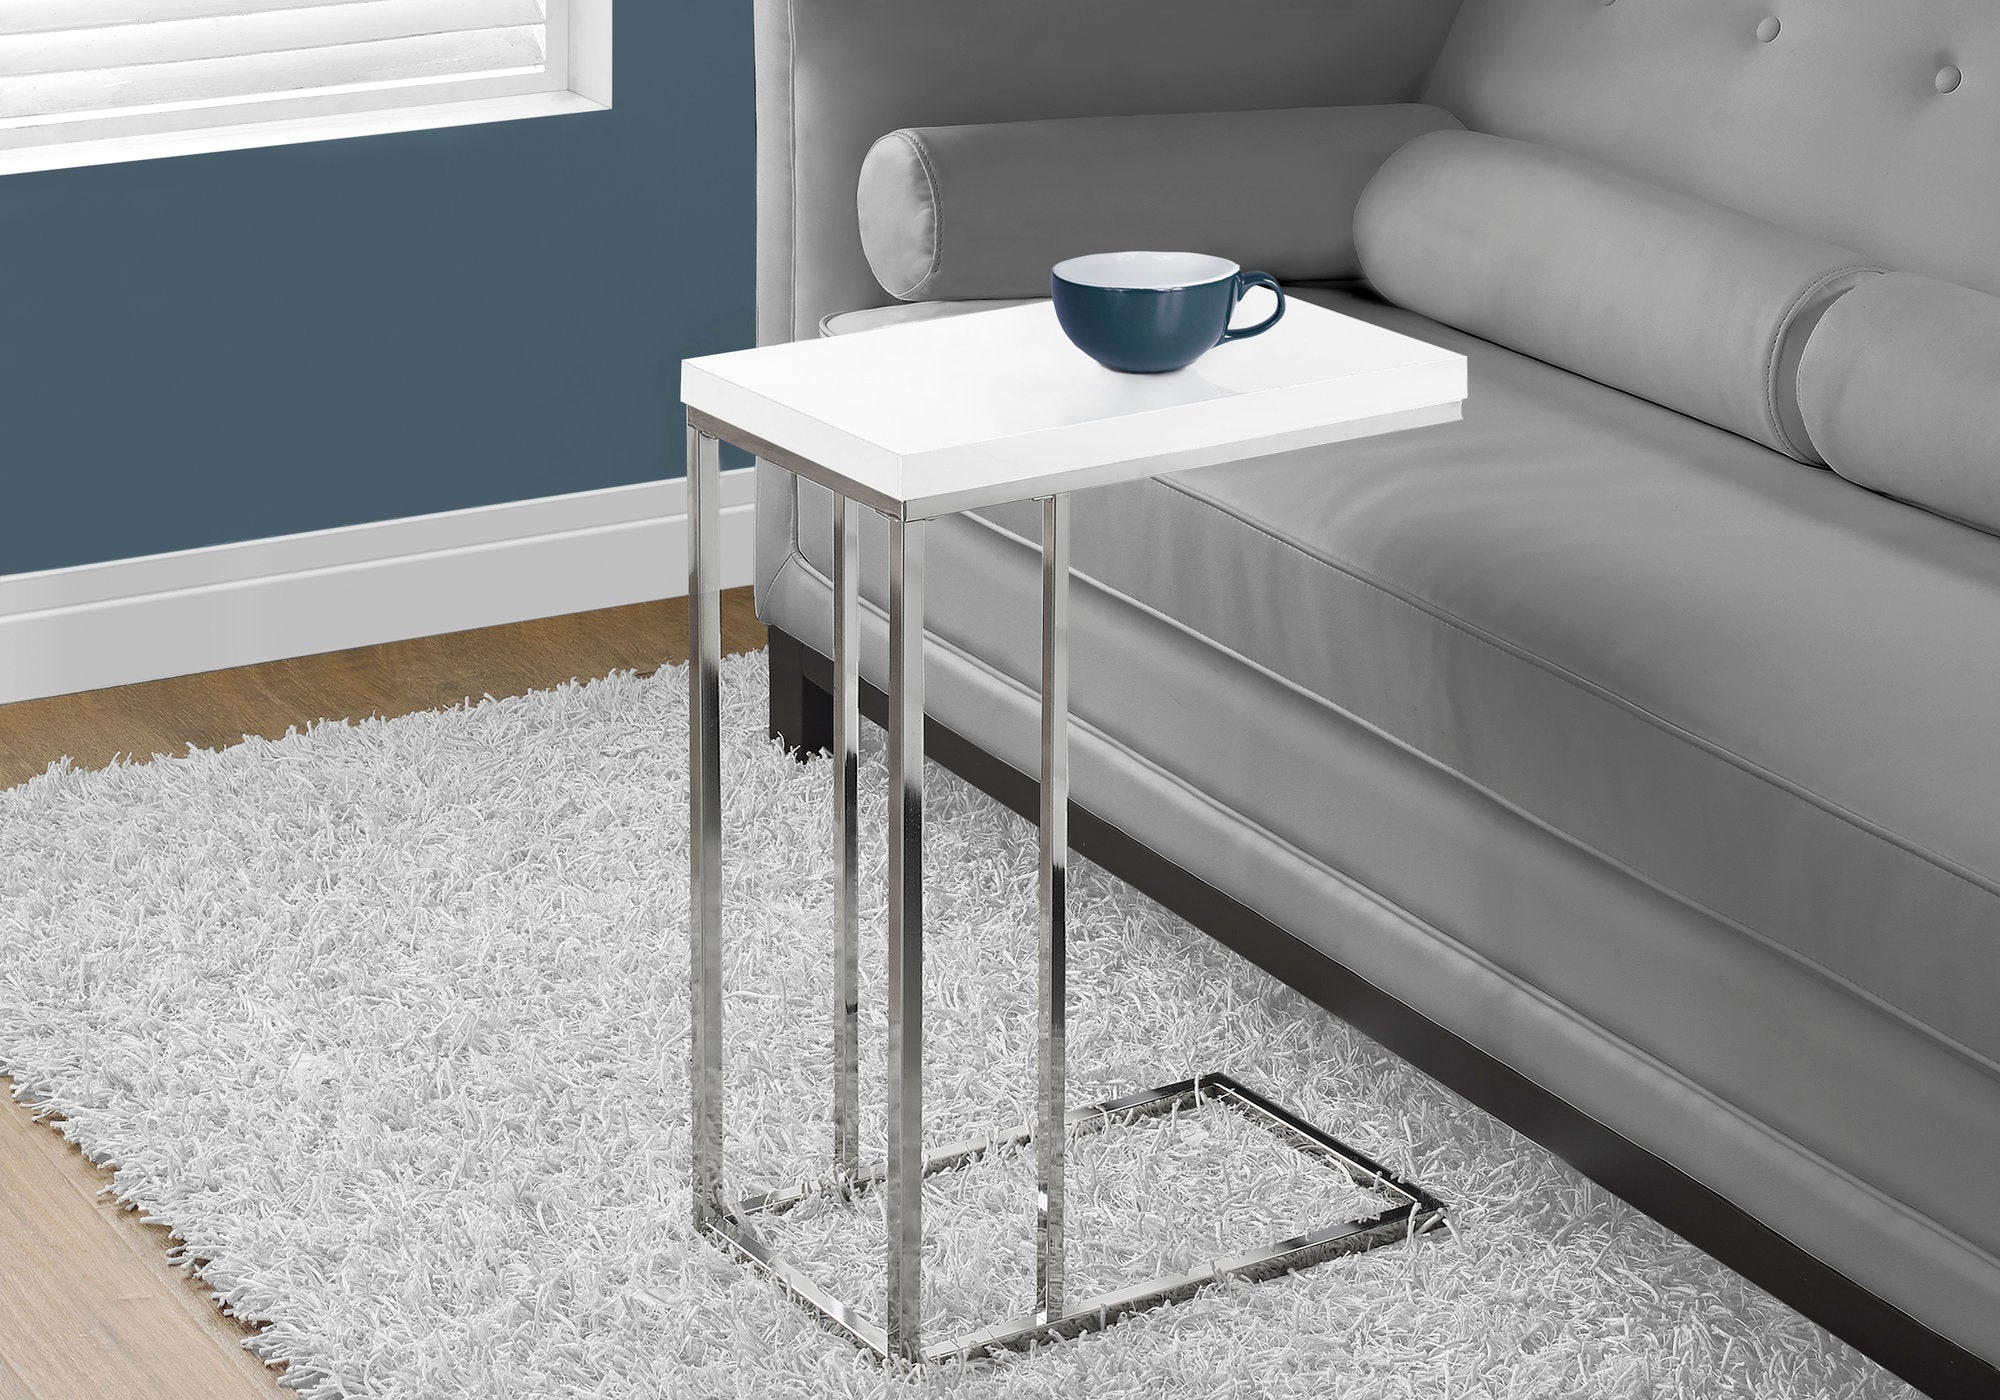 MN-763008    Accent Table, C-Shaped, End, Side, Snack, Living Room, Bedroom, Metal Legs, Laminate, Glossy White, Chrome, Contemporary, Modern